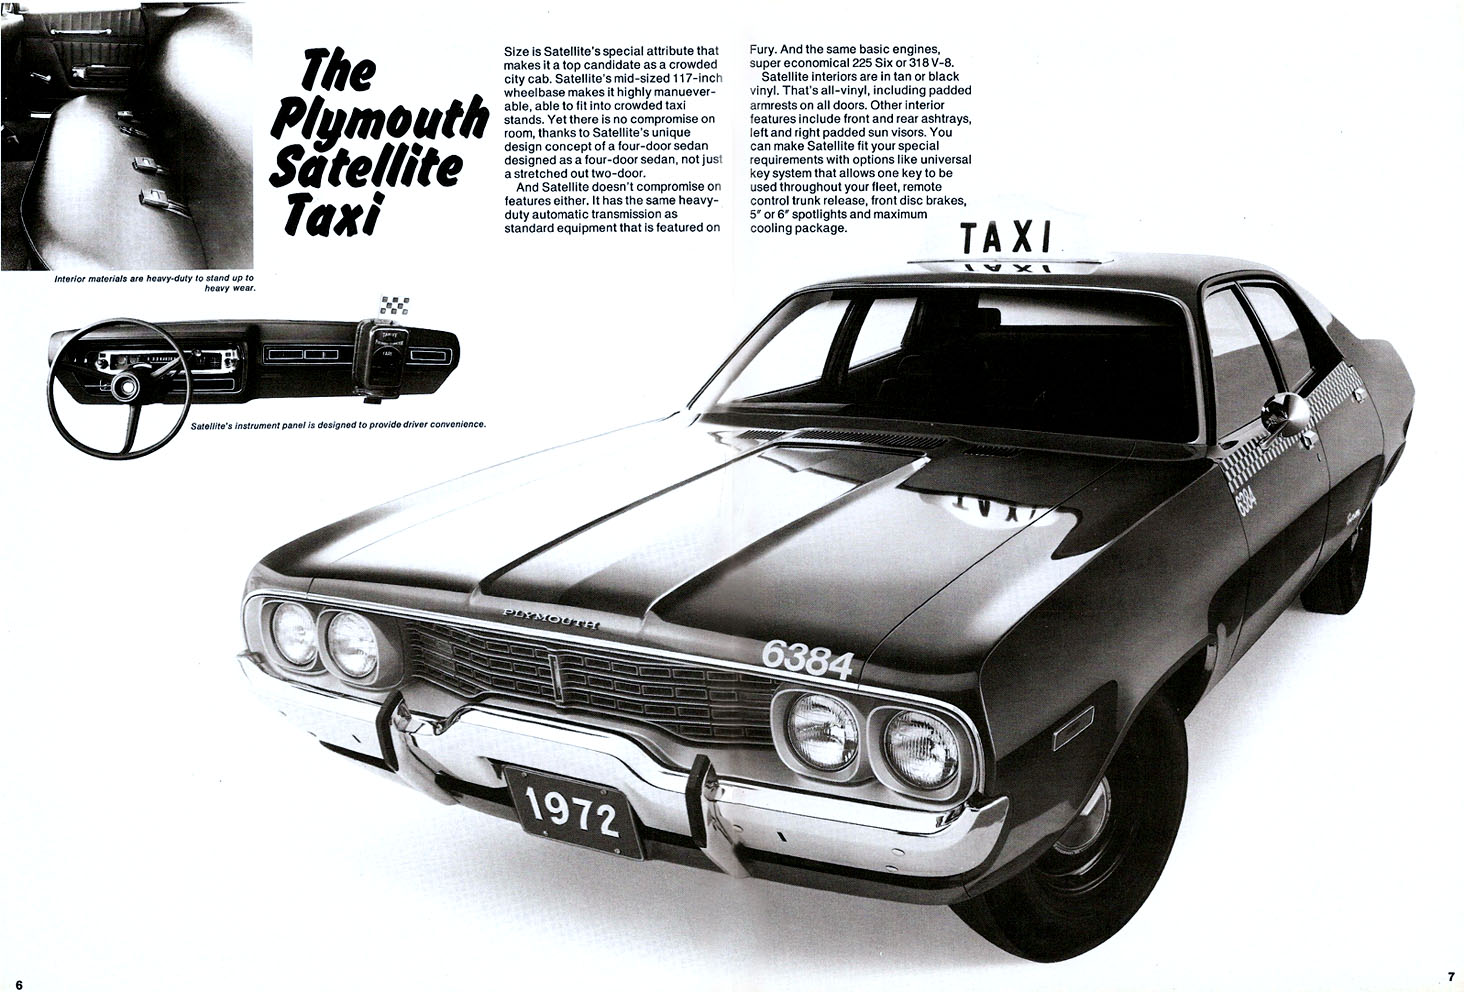 1972_Plymouth_Taxi-06-07